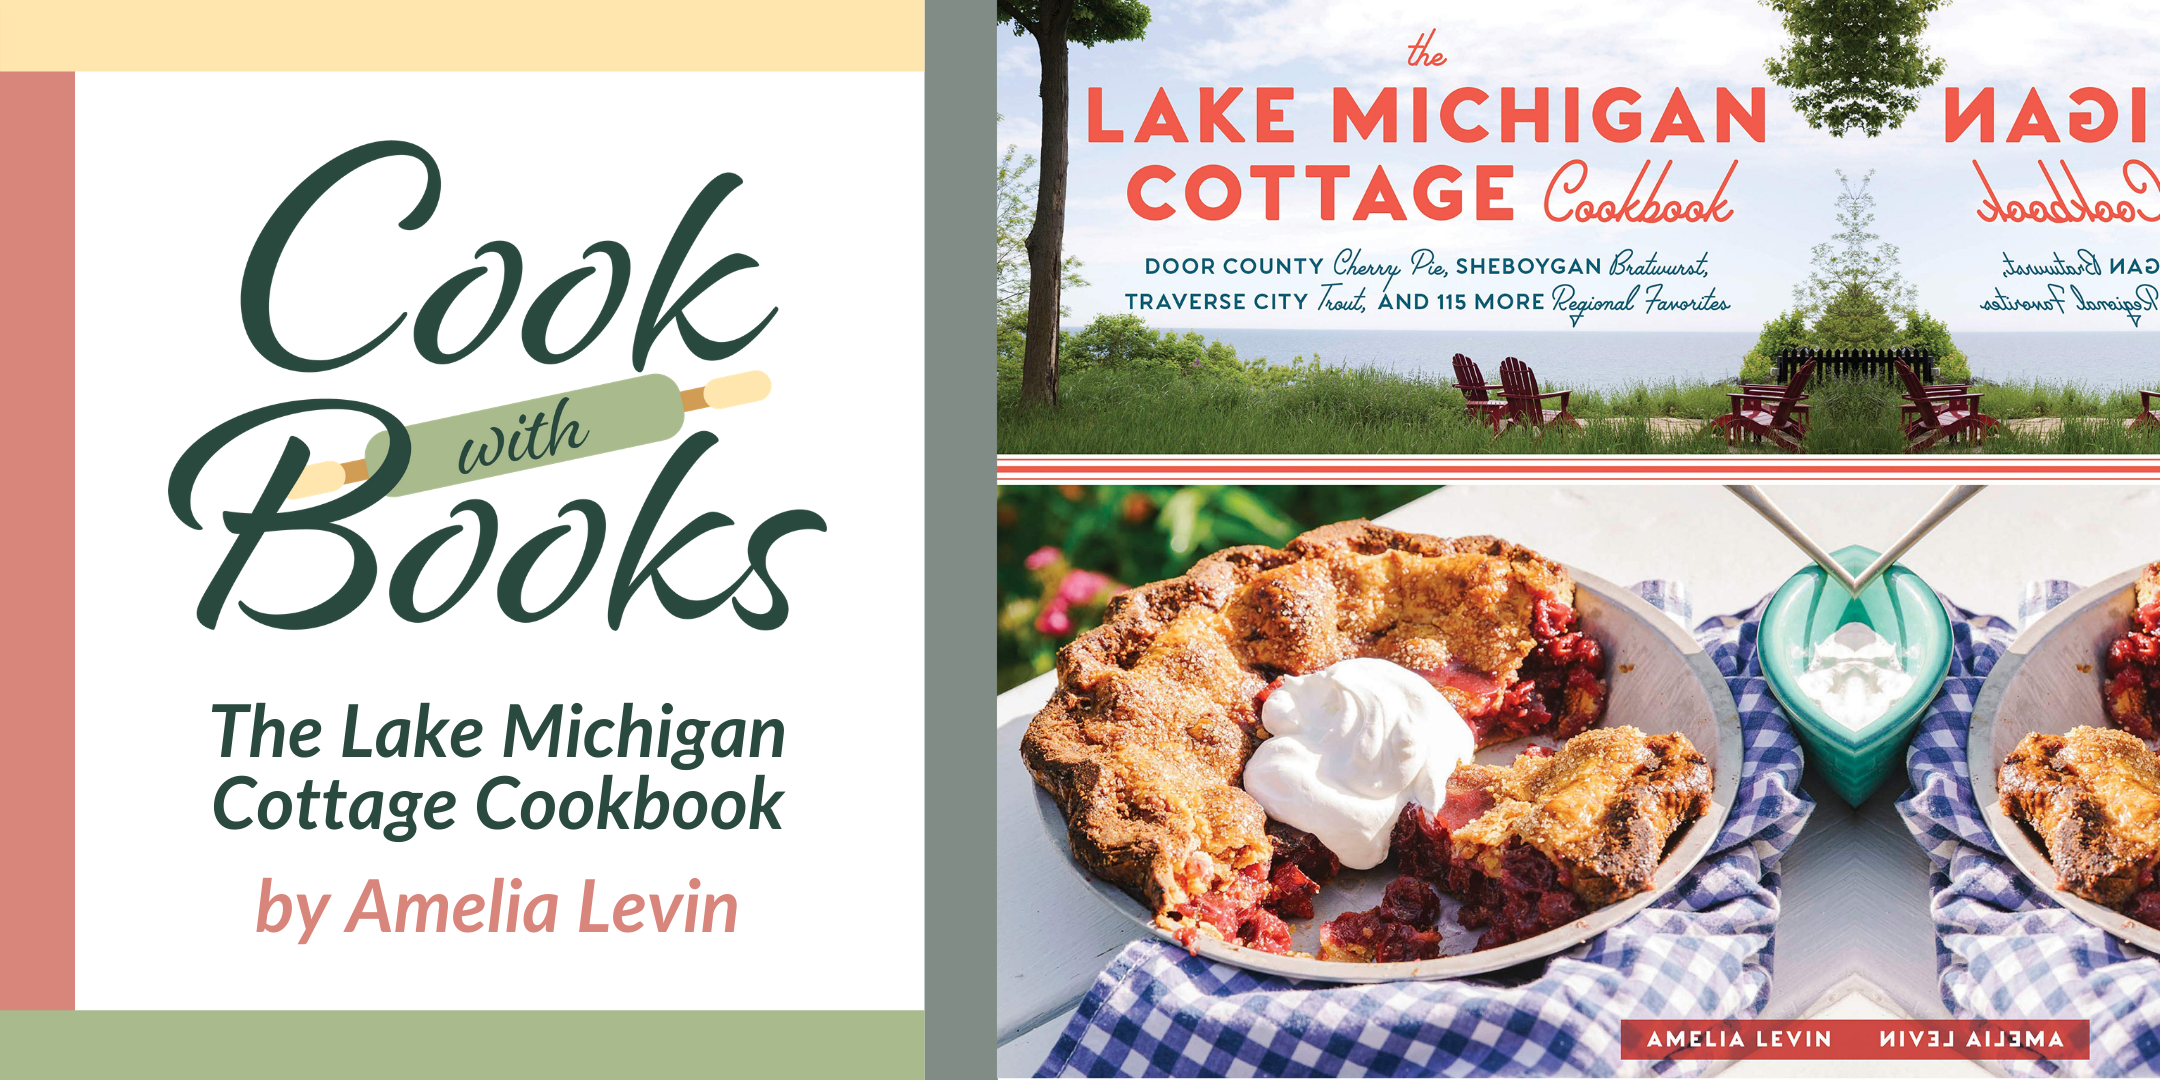 Cook with Books: The Lake Michigan Cottage Cookbook